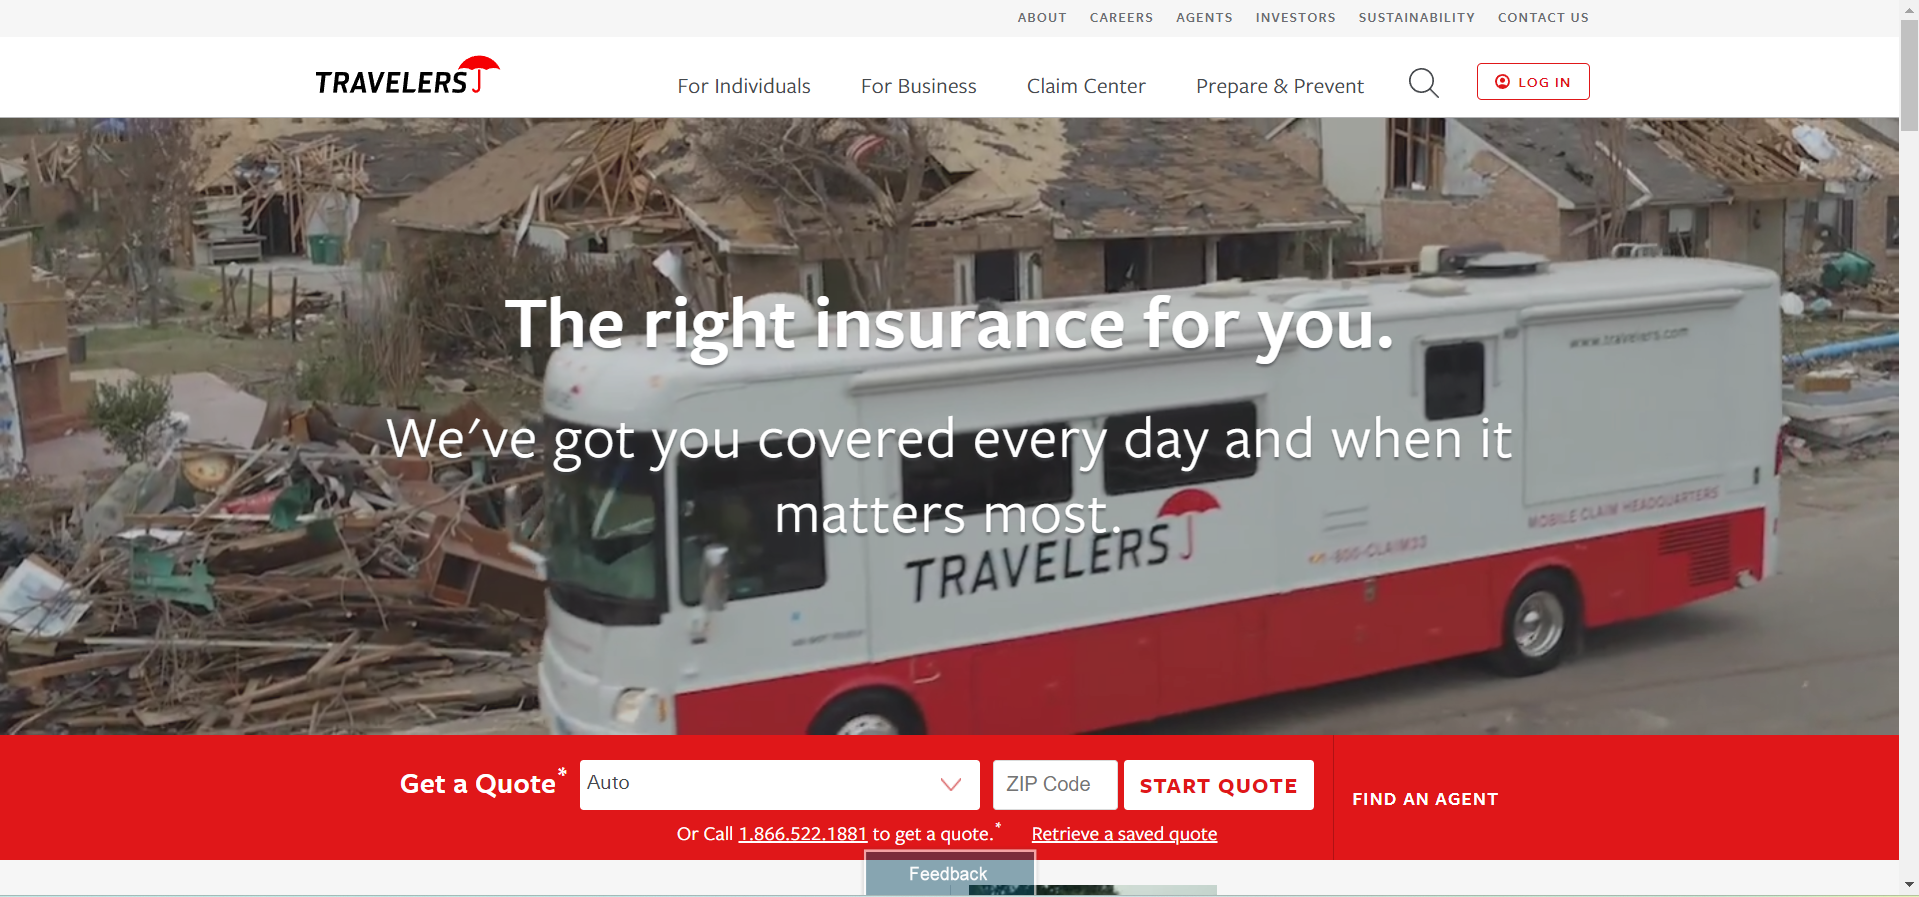 Best Auto Insurance for Government Employees: Travelers. State Farm, Farmers